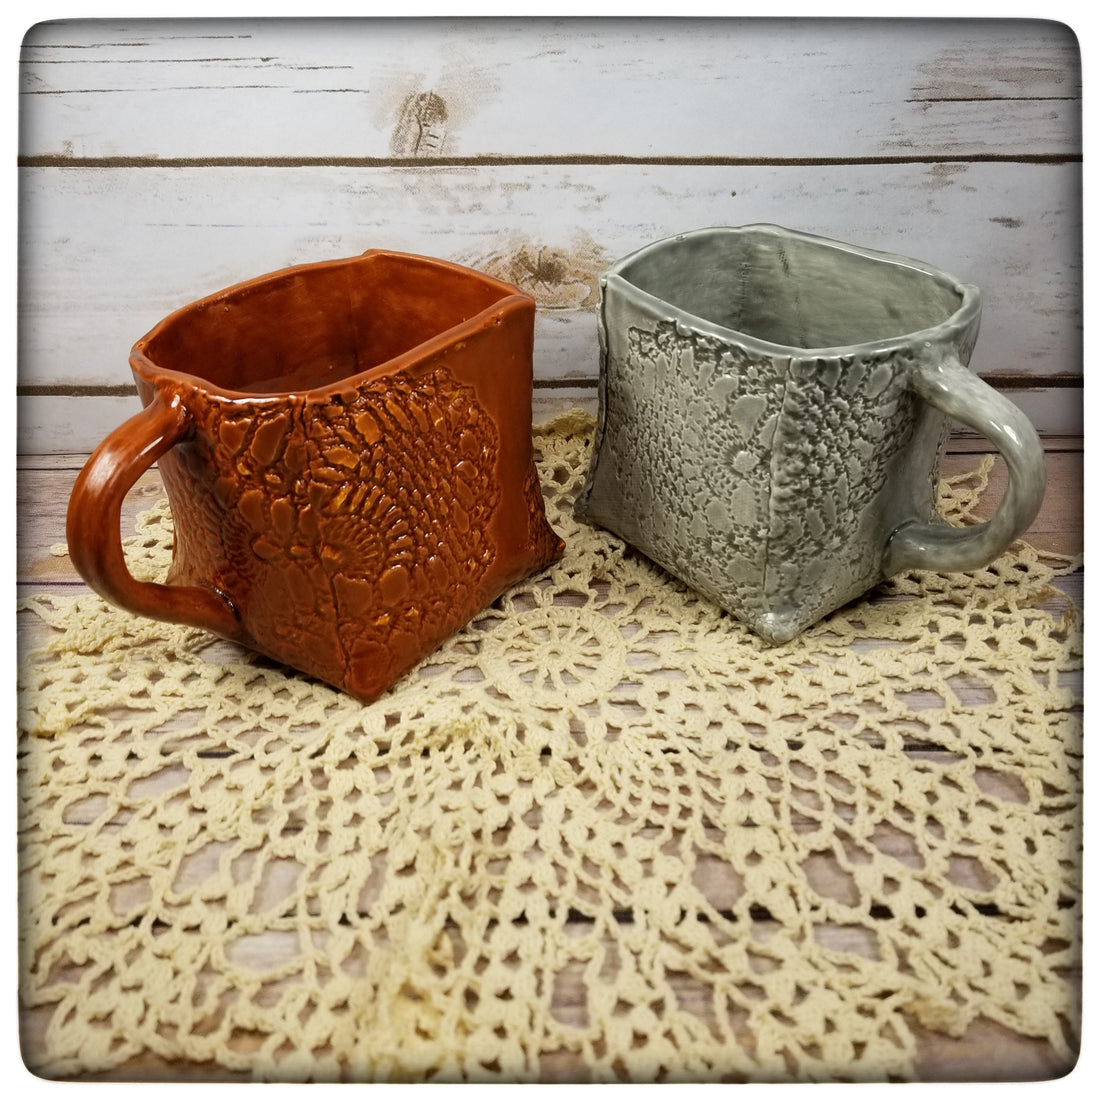 This Week Only: Crocheted Doily Mugs